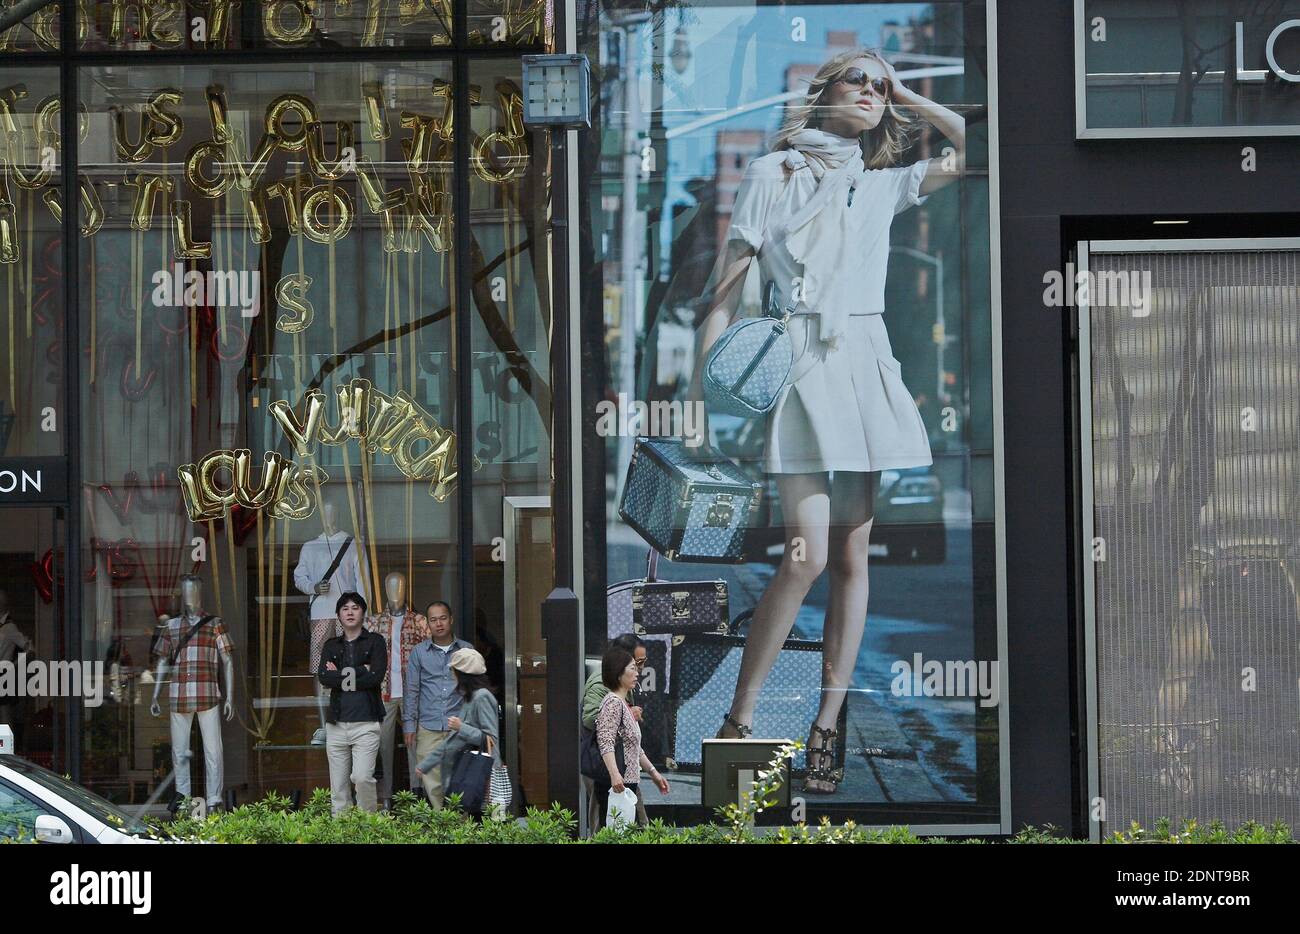 JAPAN / Tokyo / Omotesando / The centre of Tokyo's fashion district, there are boutiques and designer shops . Stock Photo